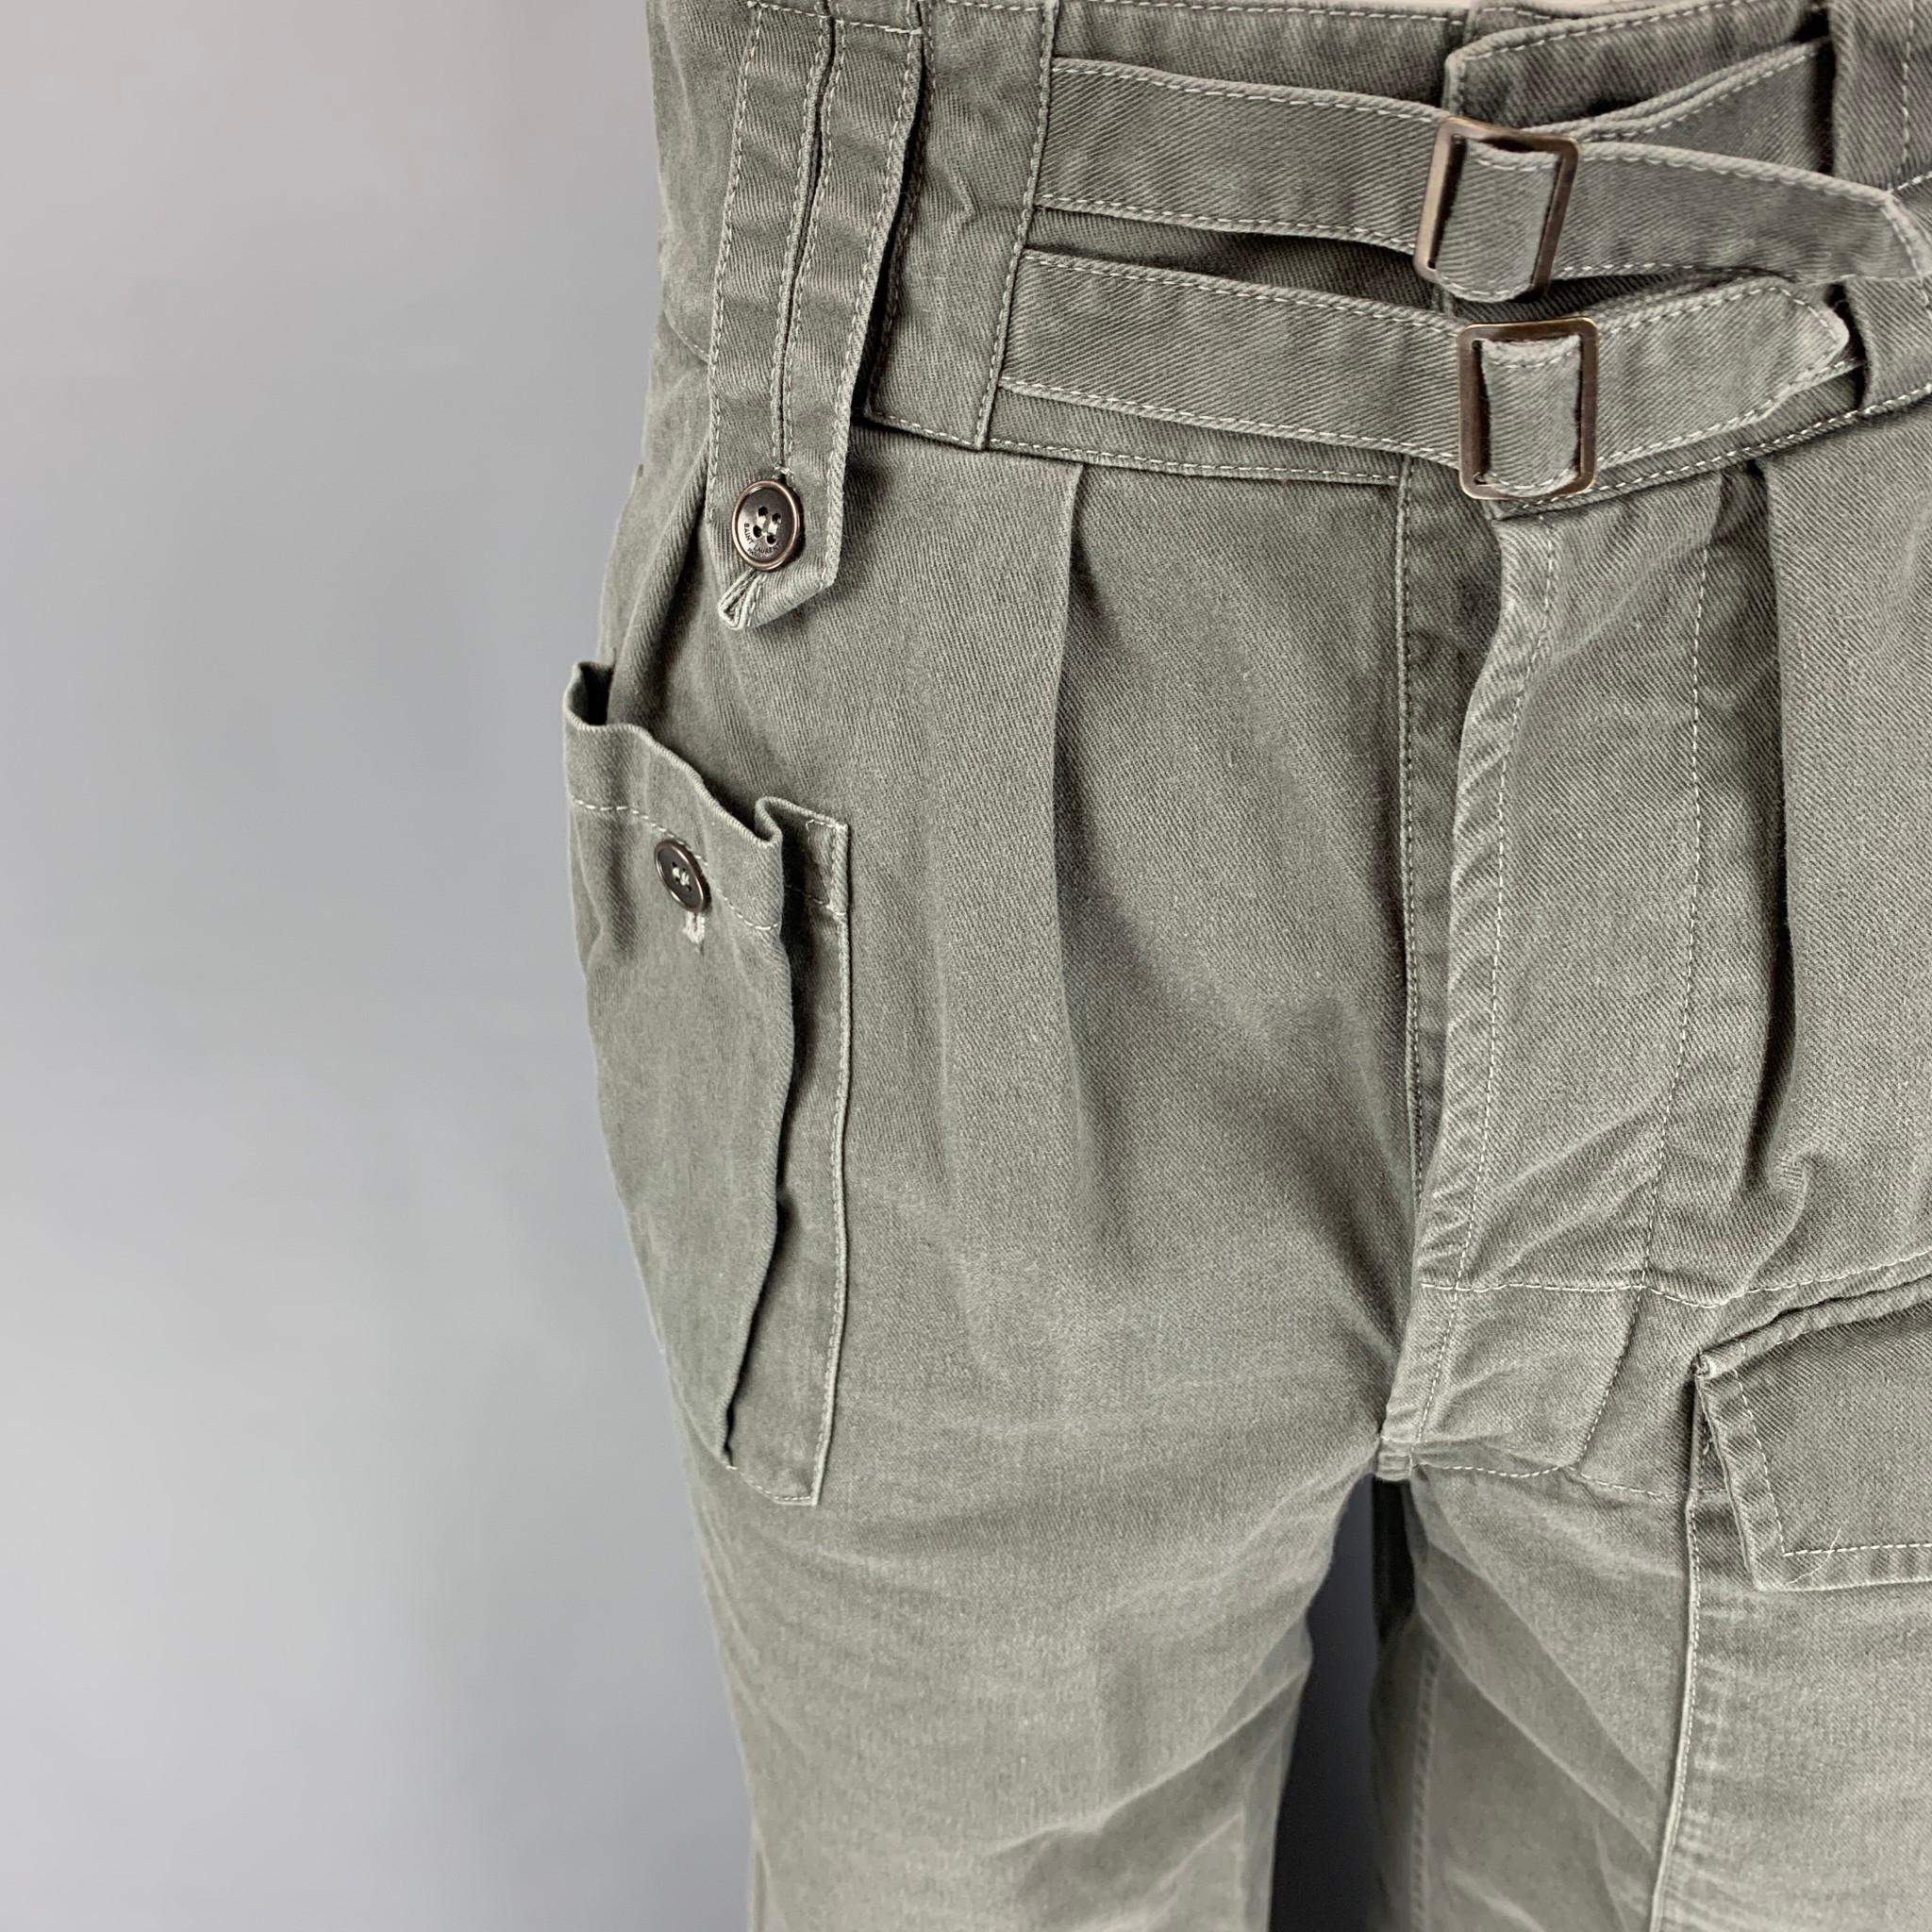 SAINT LAURENT 2019 casual pants comes in a olive twill cotton / ramie featuring a cropped style, front pockets, cuffed leg, contrast stitching, and a button fly closure. Made in Italy. 

Very Good Pre-Owned Condition.
Marked: F